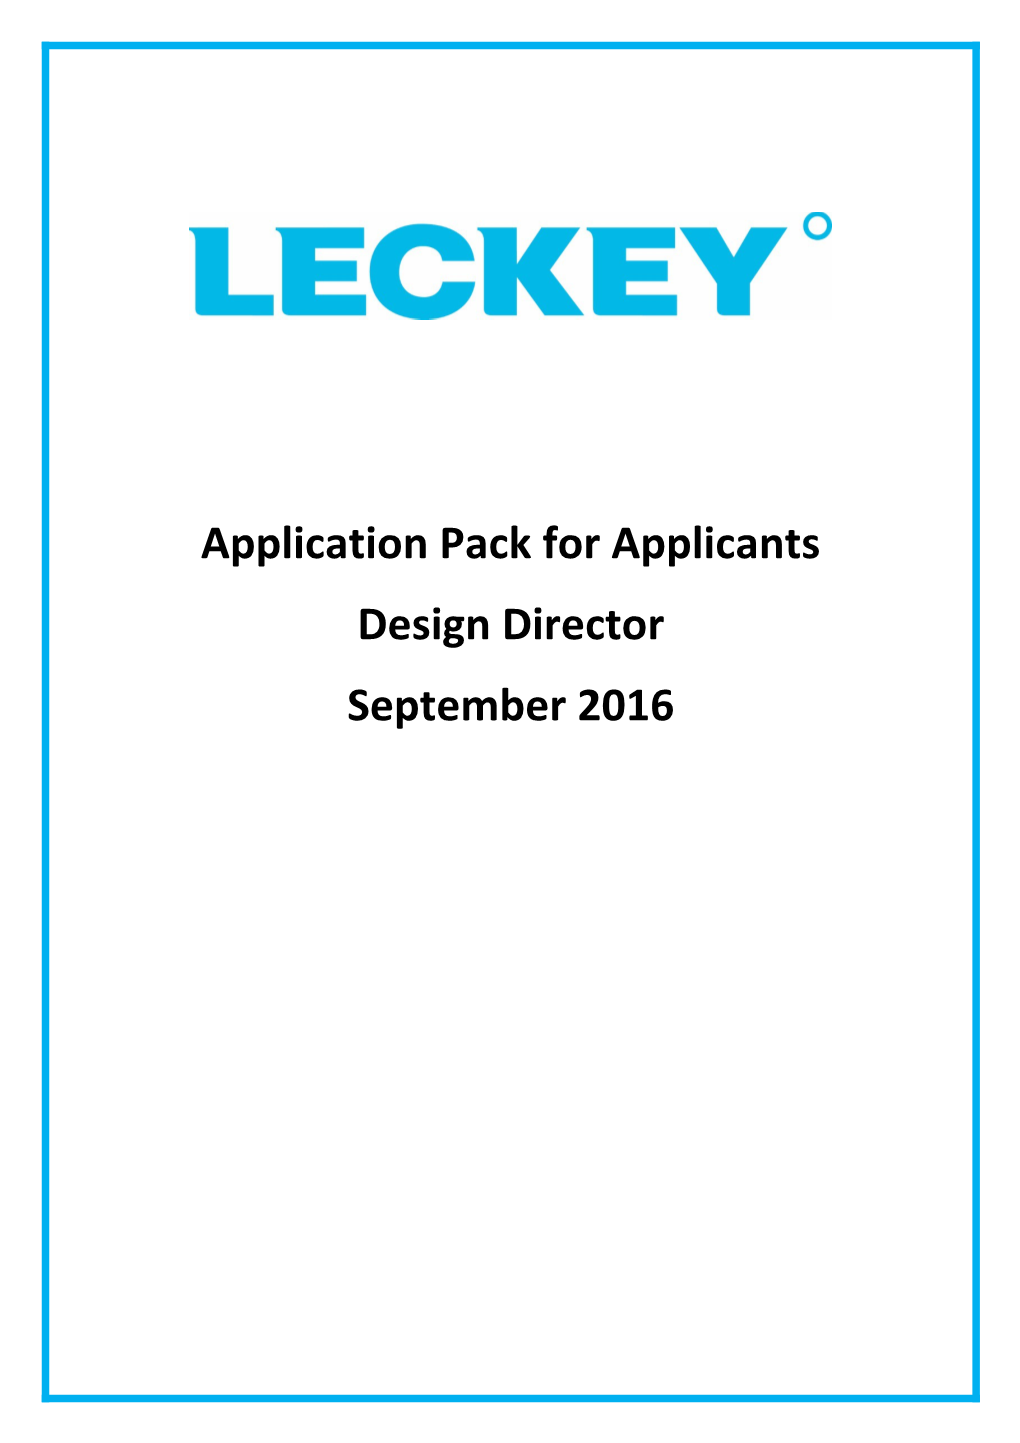 Application Pack for Applicants